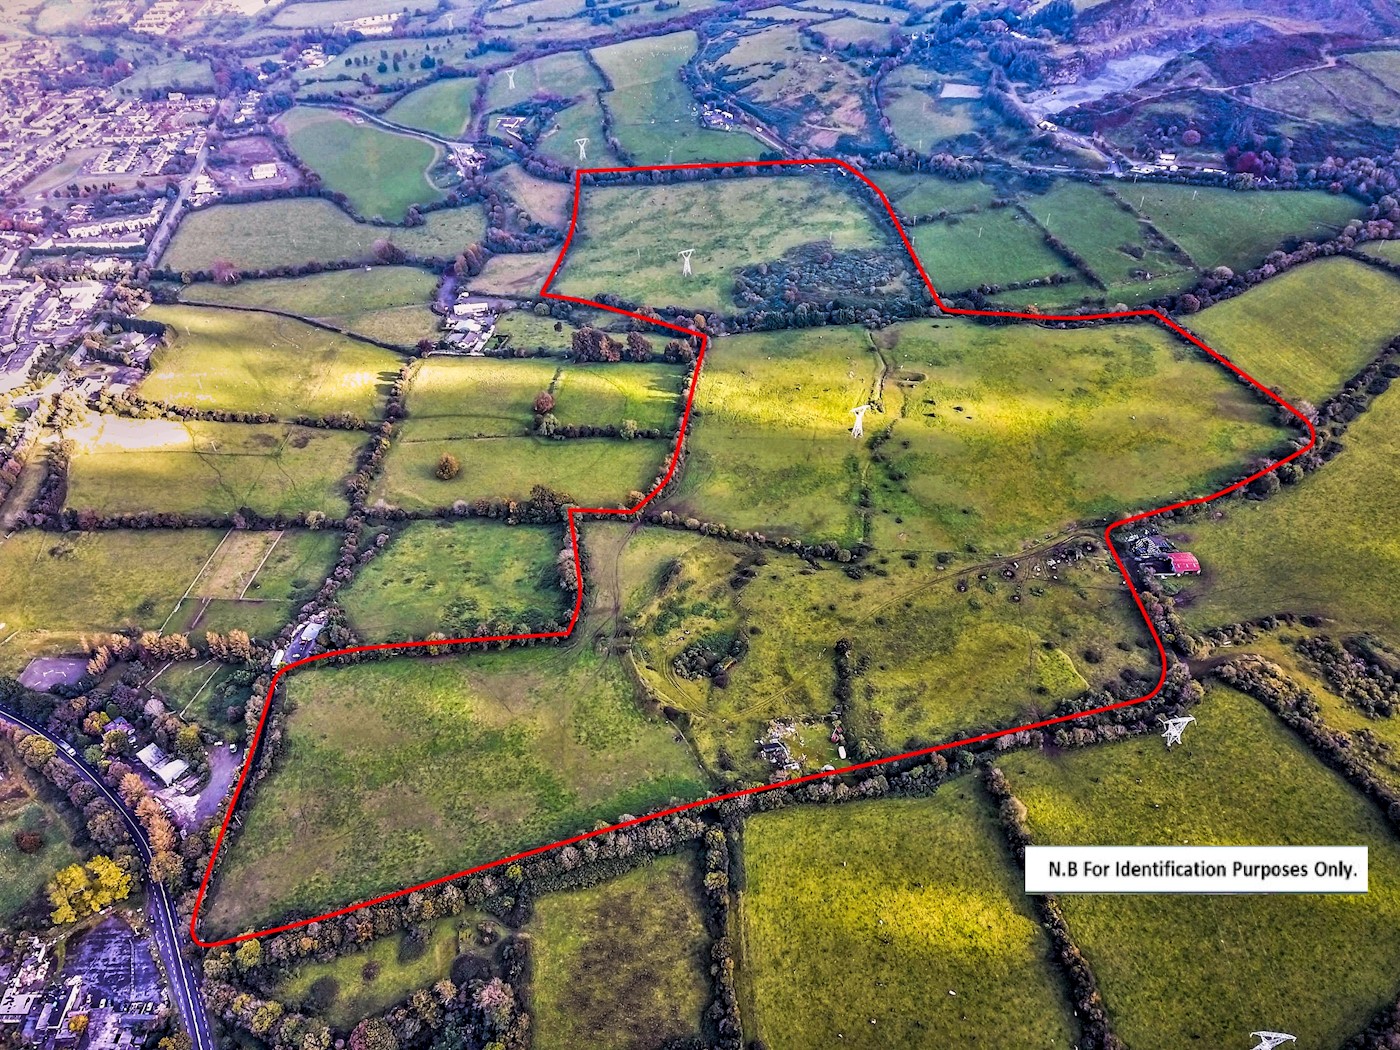 71 acre site comprised within Folio DN89751F, Corbally, Saggart, Co. Dublin 1/5